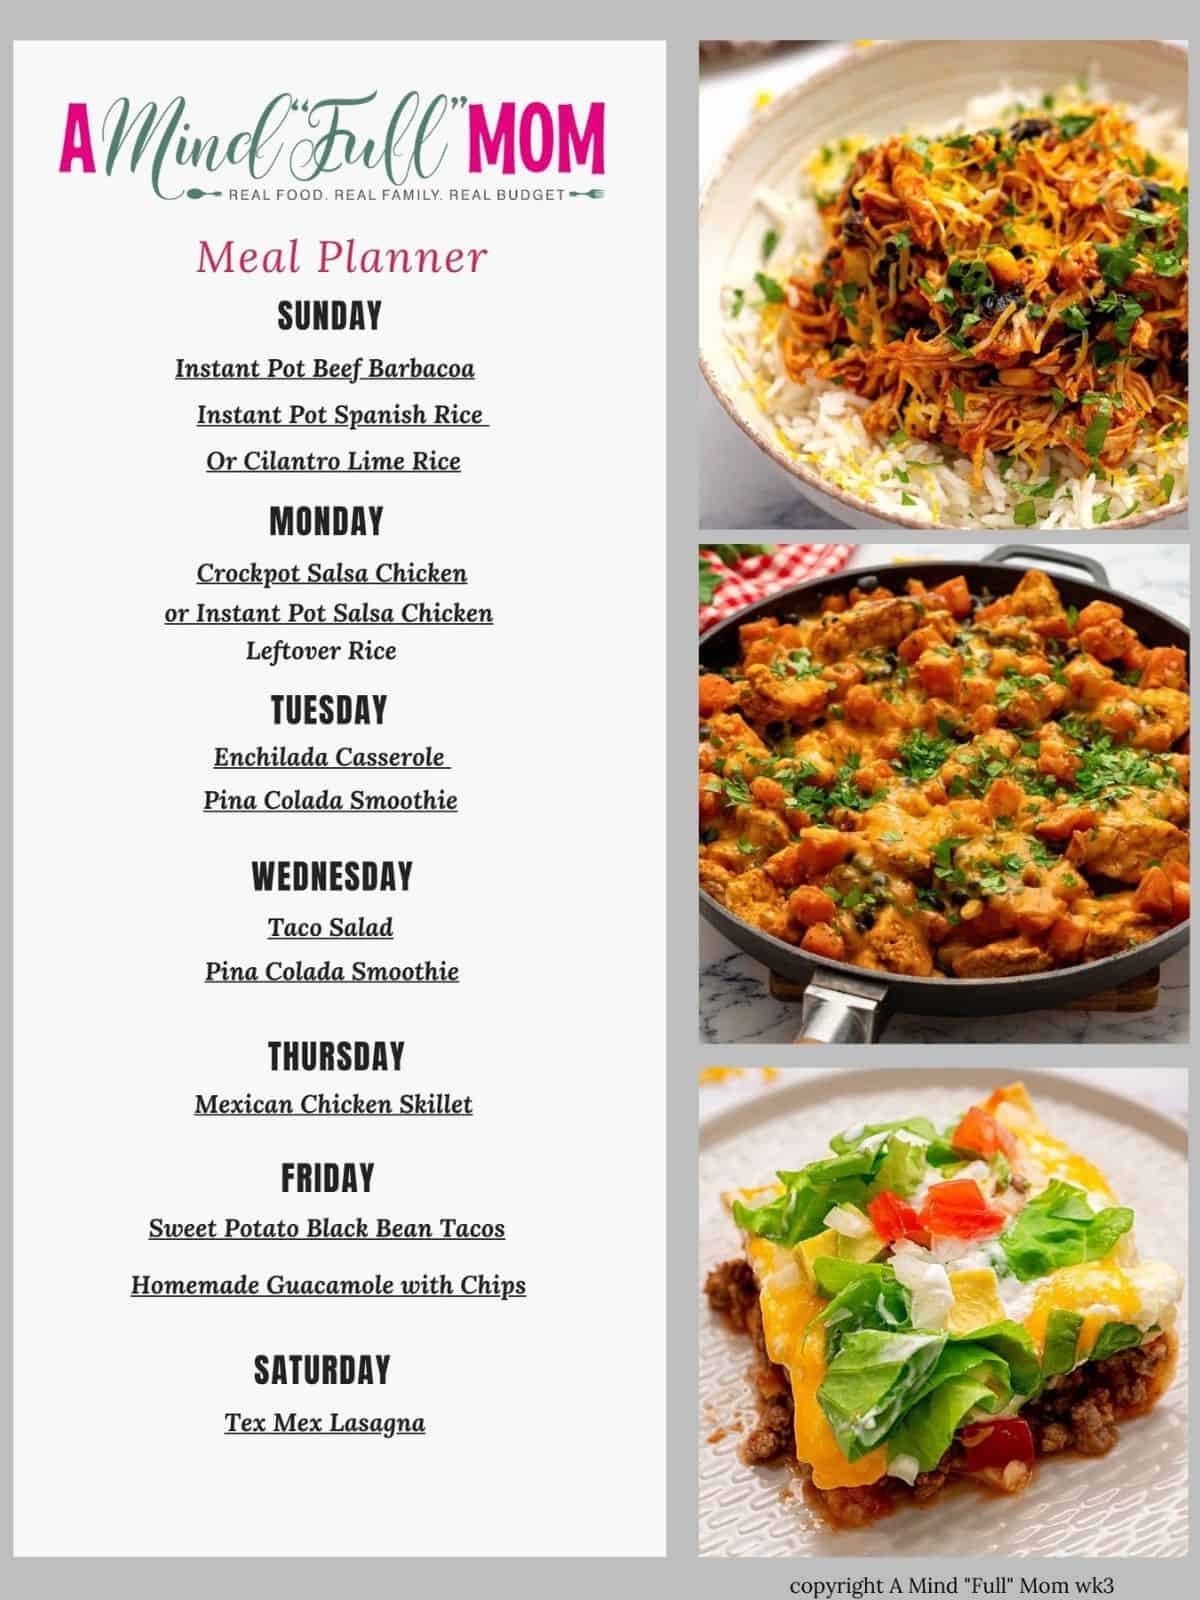 Photo of front page of meal plan.